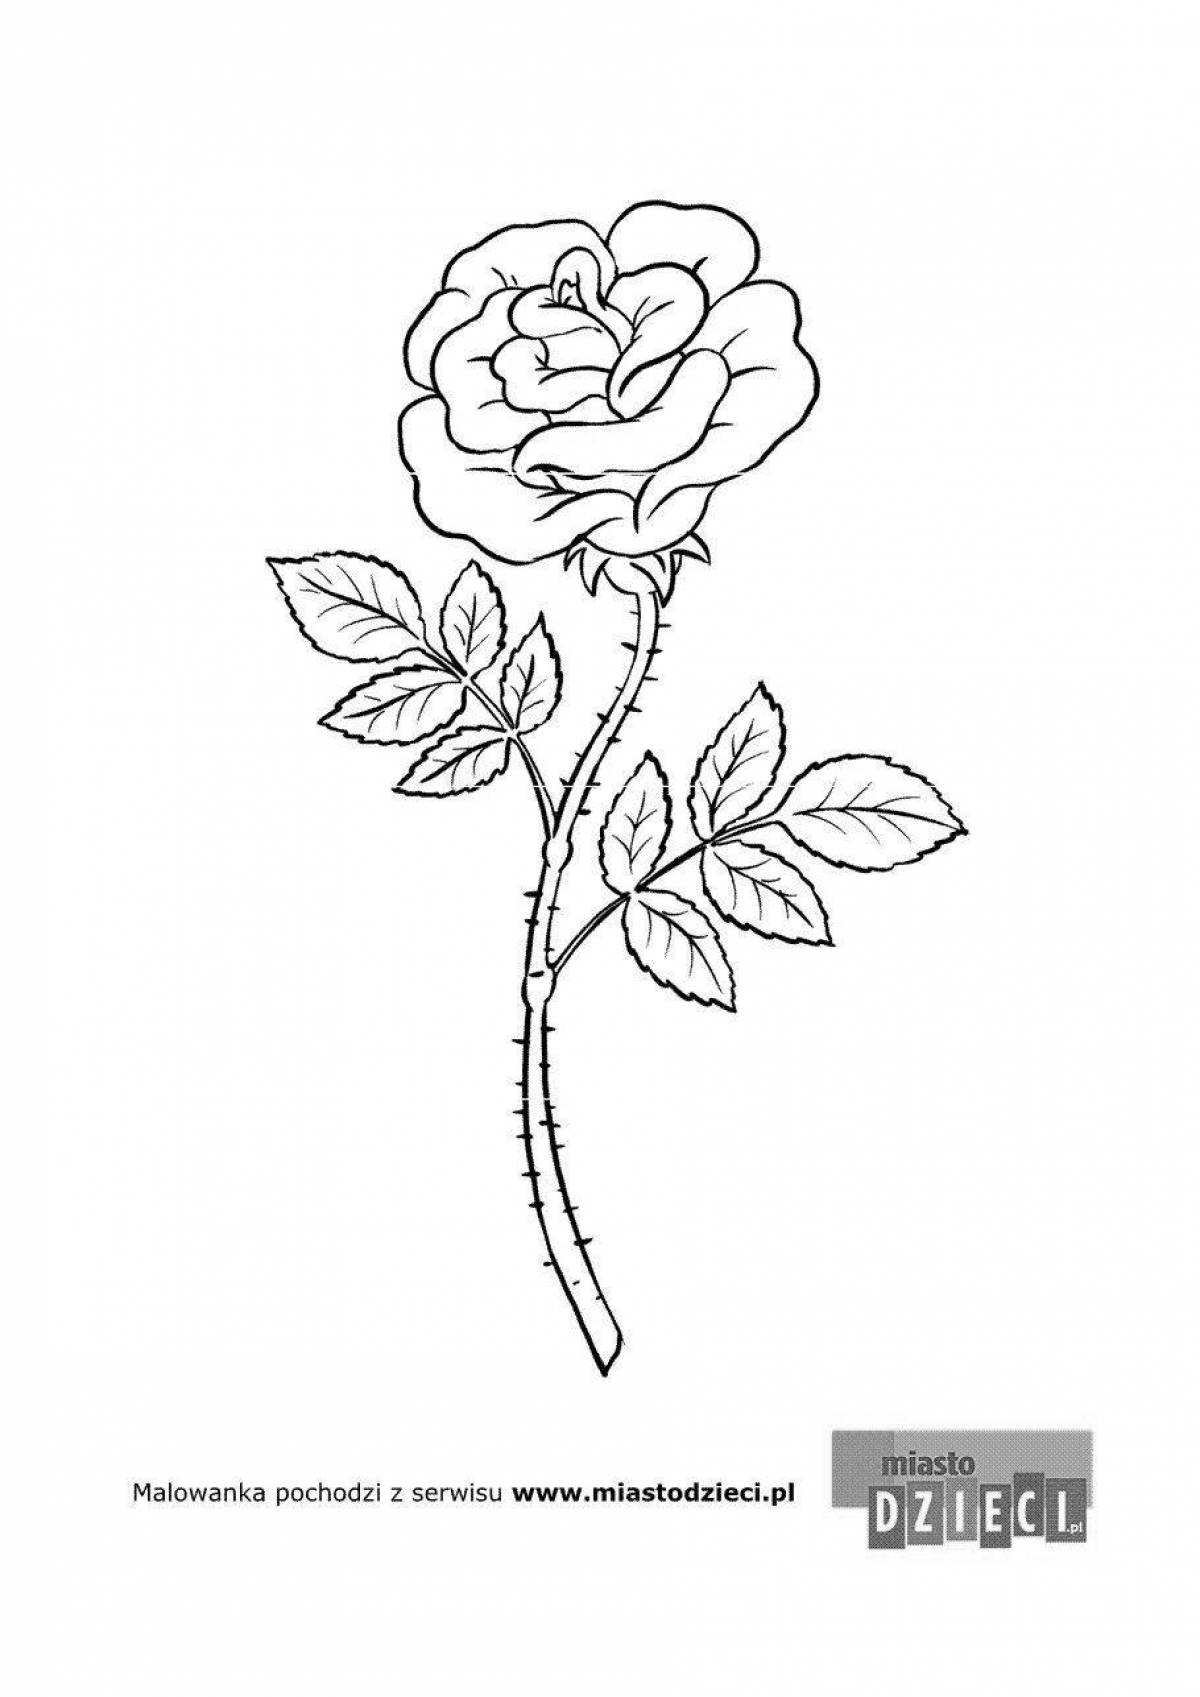 Colorful toad and rose coloring page